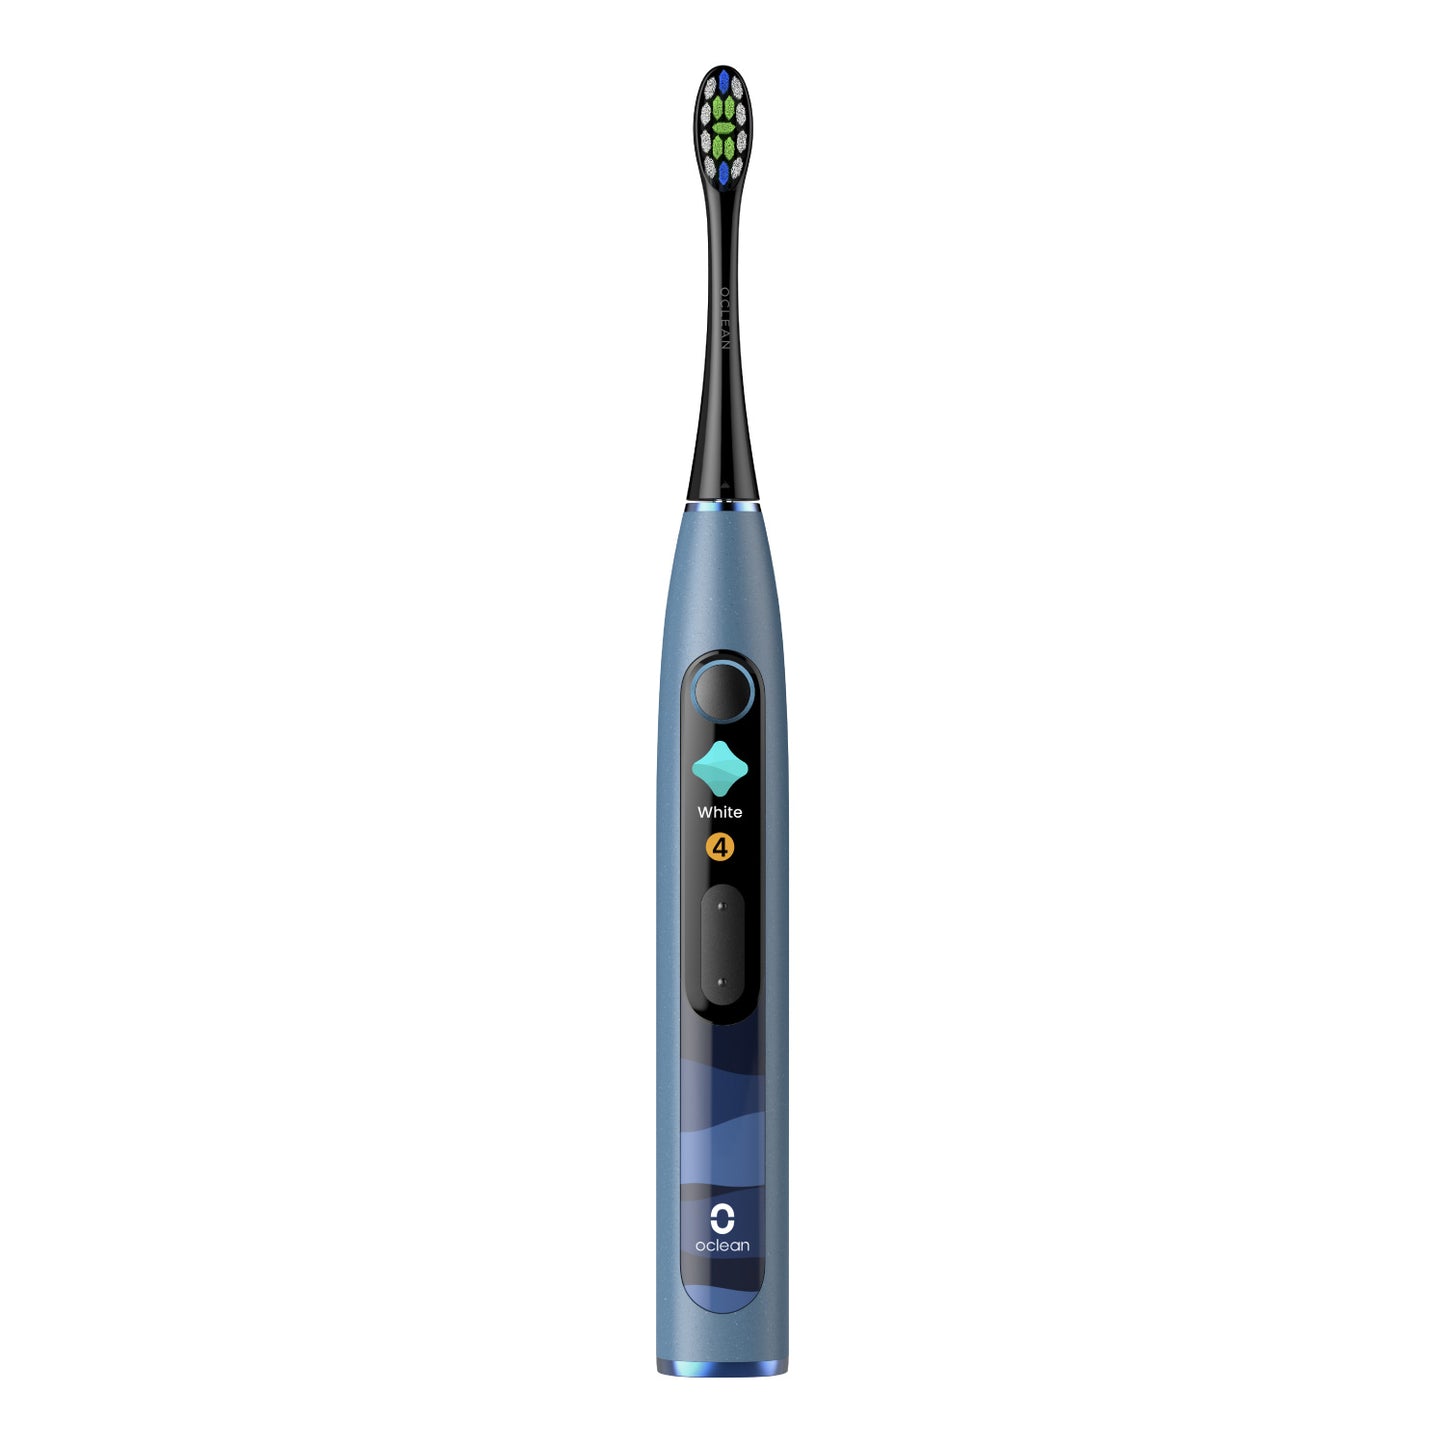 Oclean Air 2 Sonic Electric Toothbrush Toothbrushes White  Oclean US Store